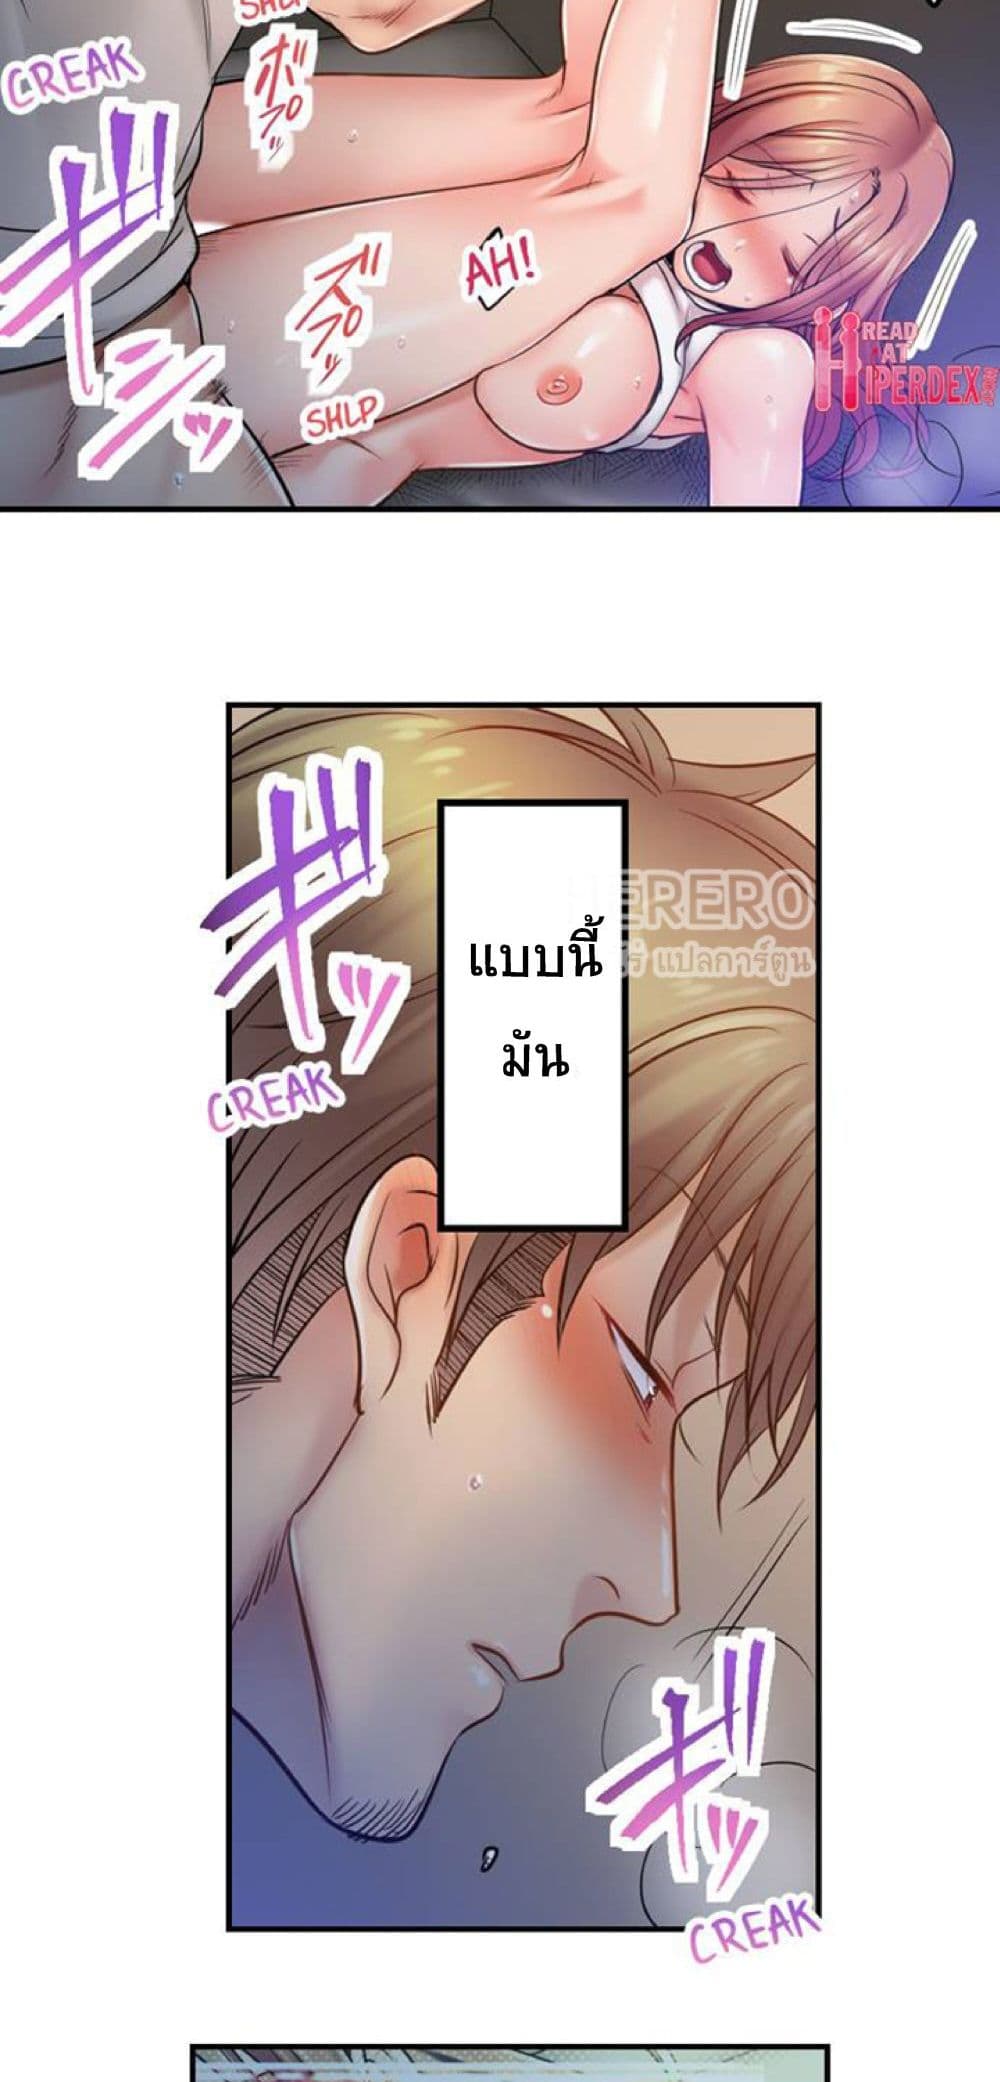 I Can't Resist His Massage! Cheating in Front ร ยธโ€ขร ยธยญร ยธโขร ยธโ€”ร ยธยตร ยนห93 (14)